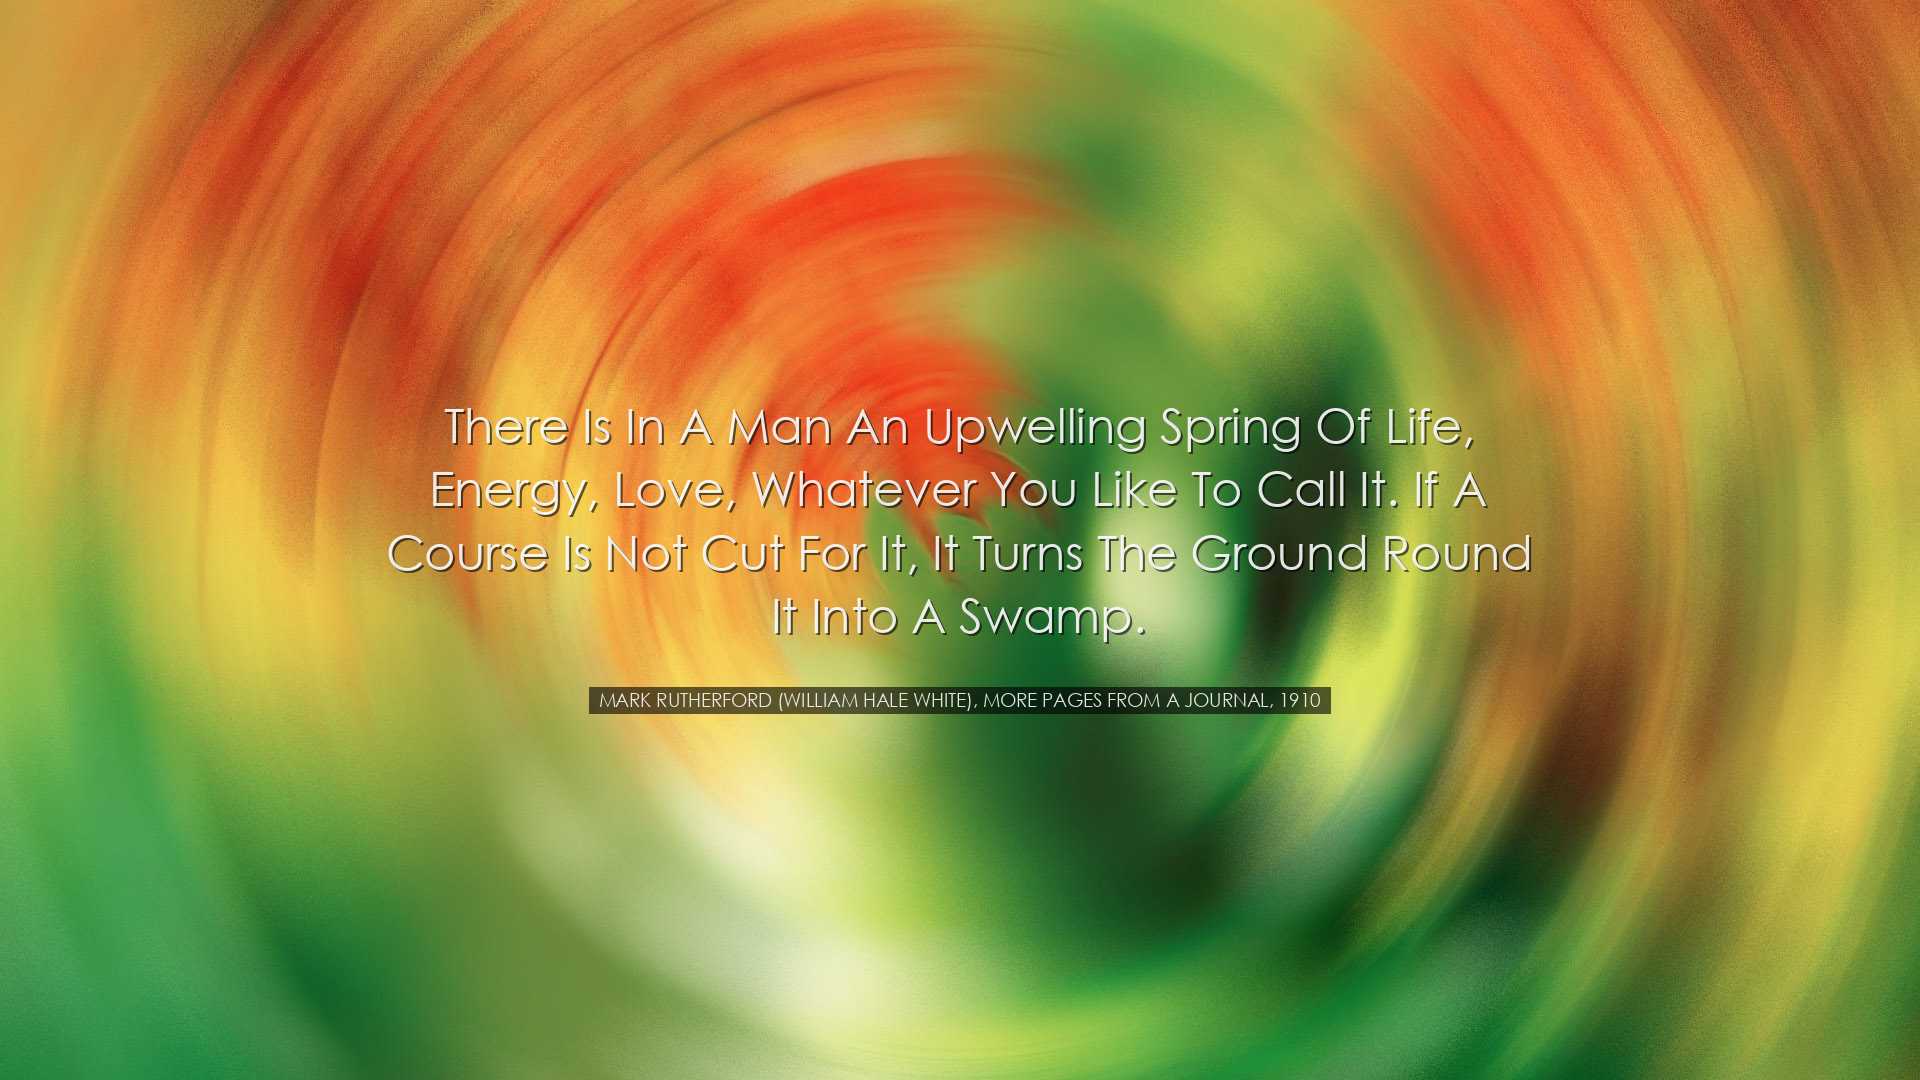 There is in a man an upwelling spring of life, energy, love, whate